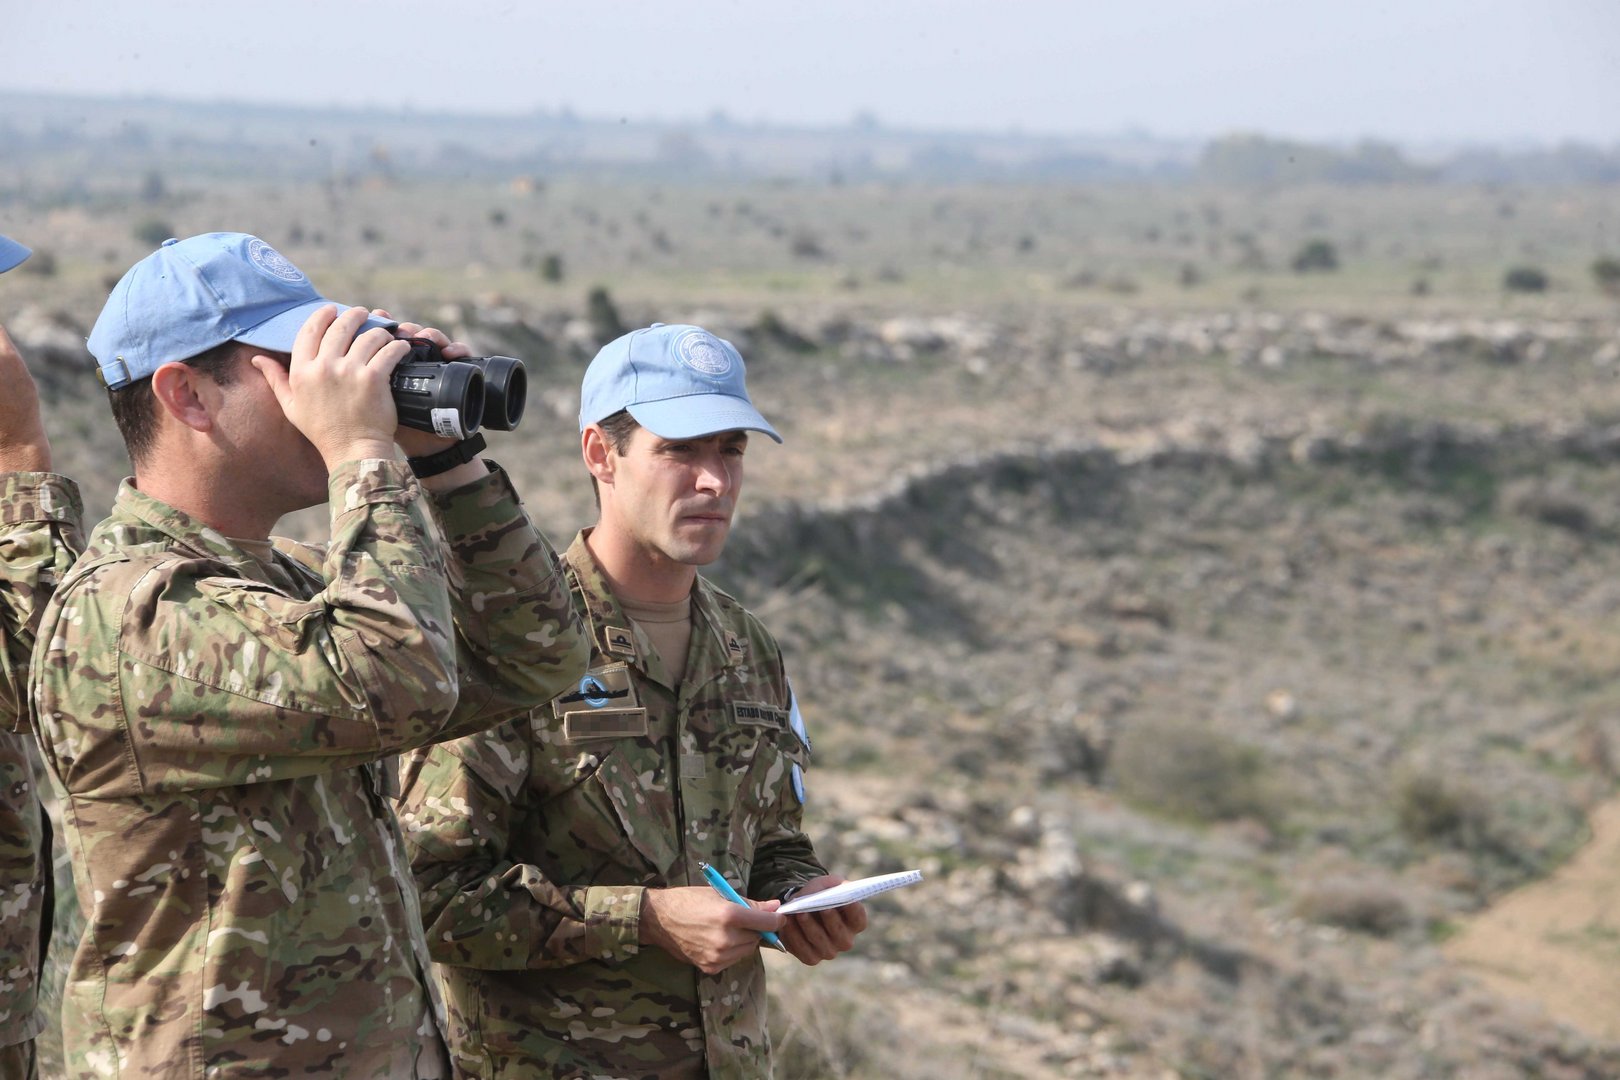 image 1.7 million square metres on the island classified as ‘dangerous’ says Unficyp